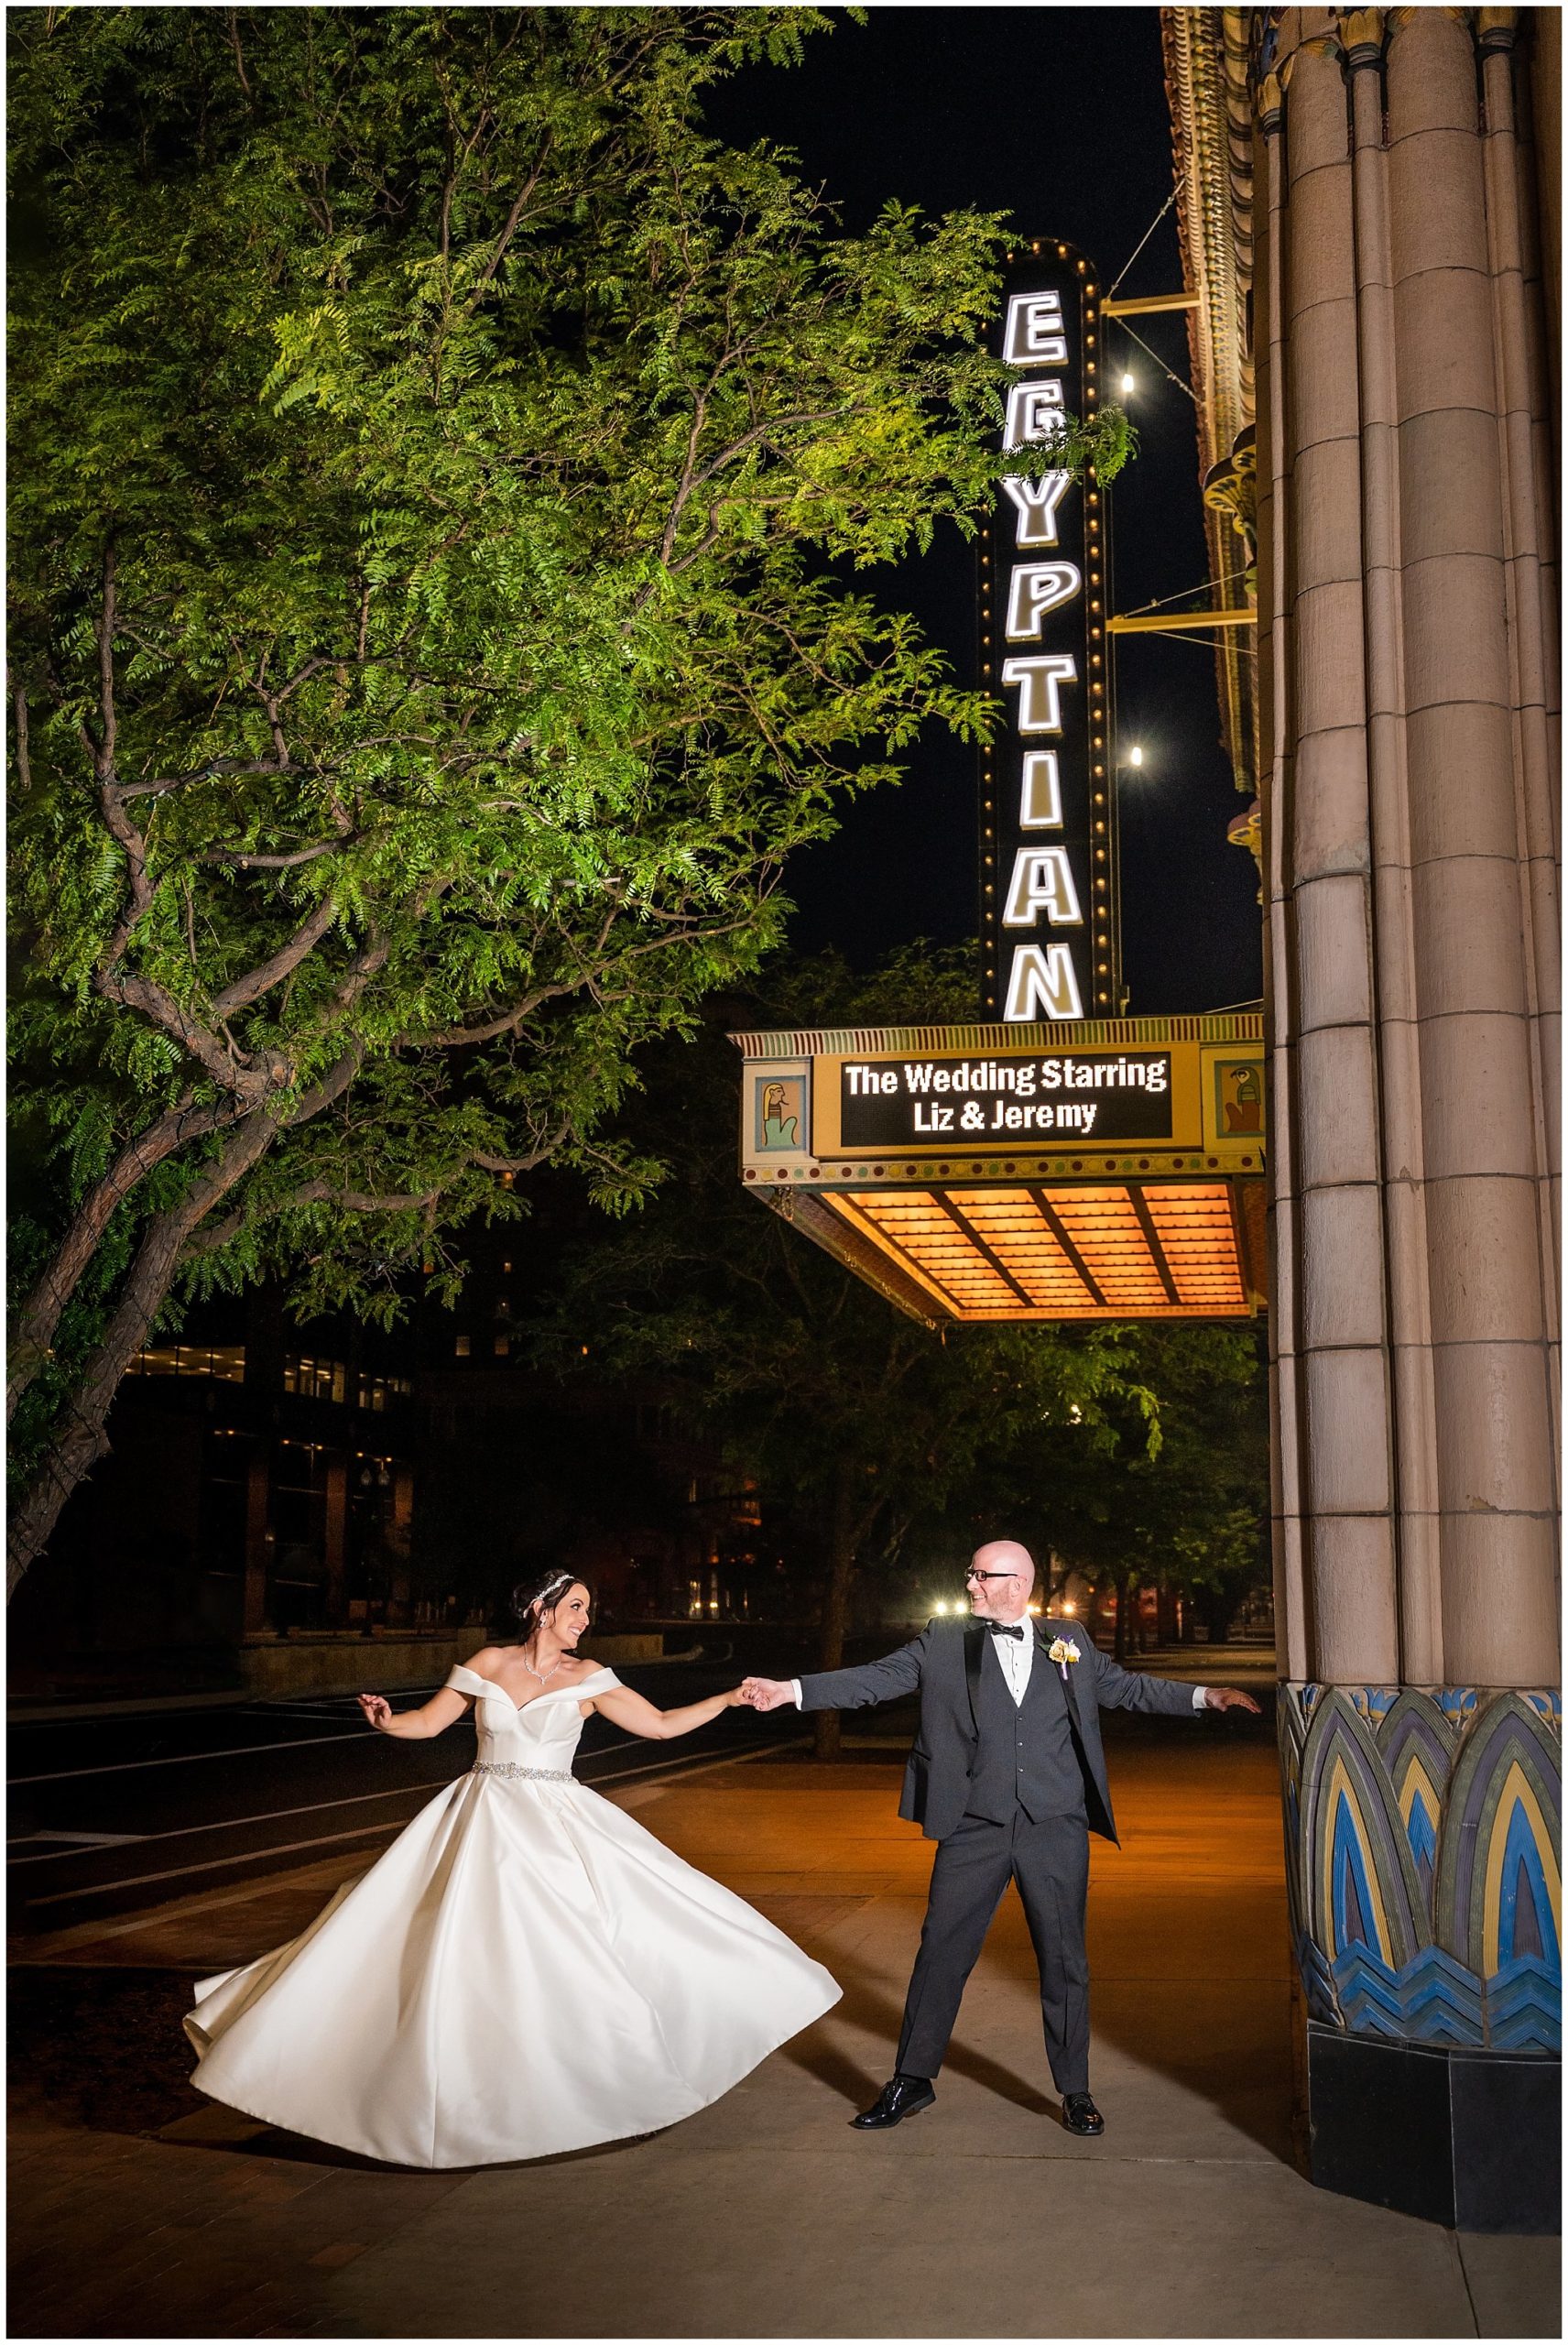 Night portraits of couple outside theater after dark | Broadway Musical Theatre Wedding